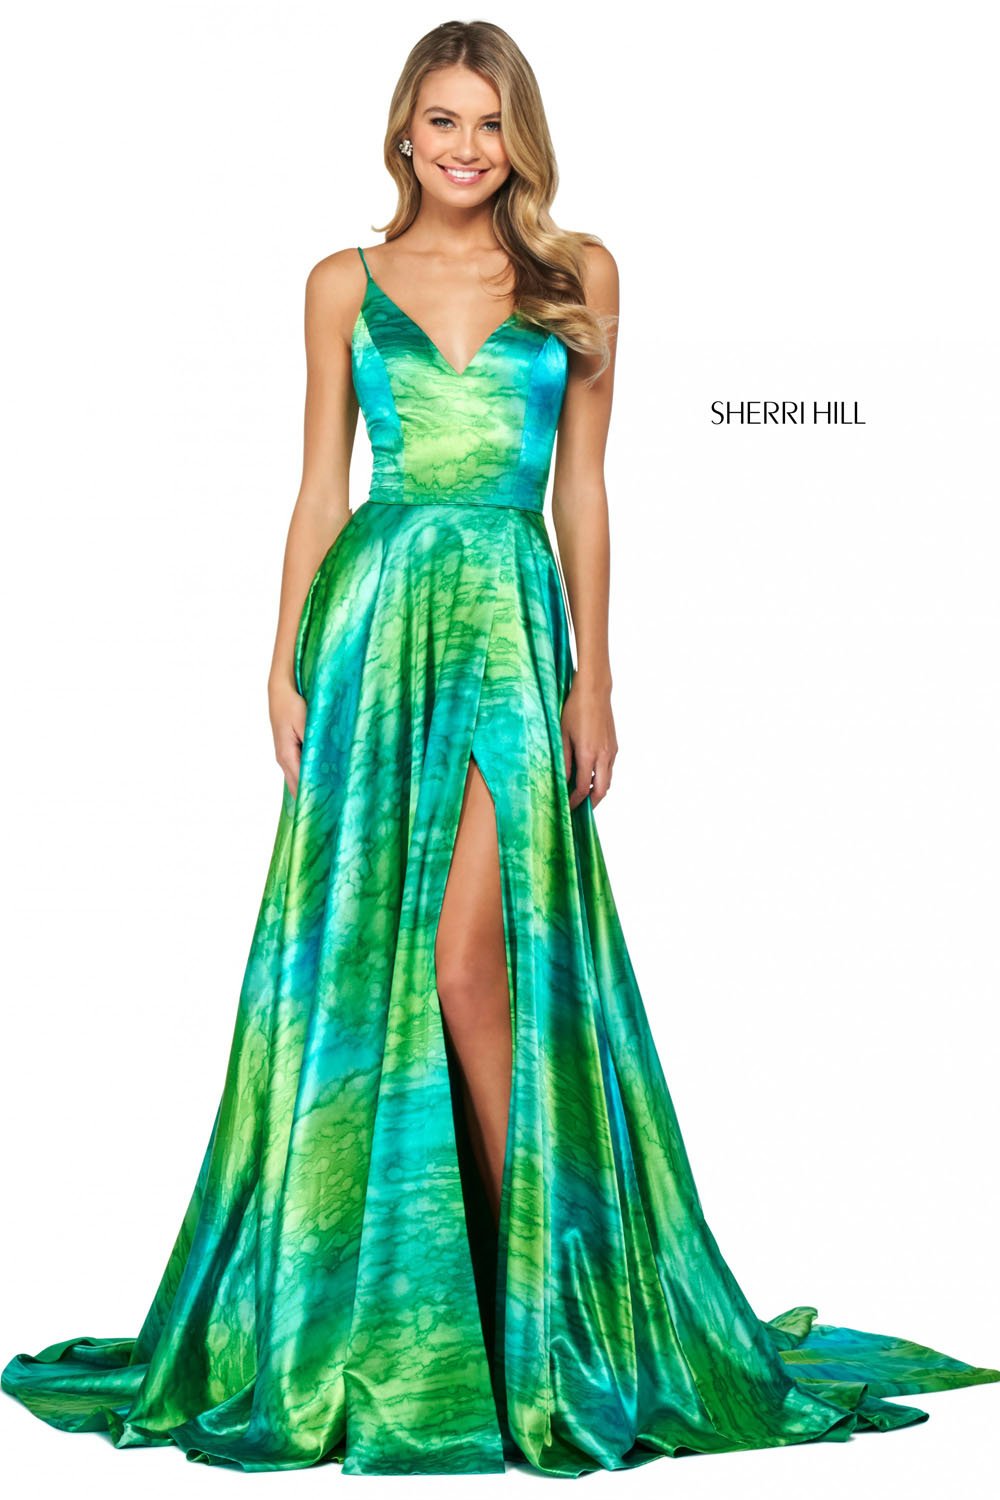 Sherri Hill 53889 dress images in these colors: Green Print.